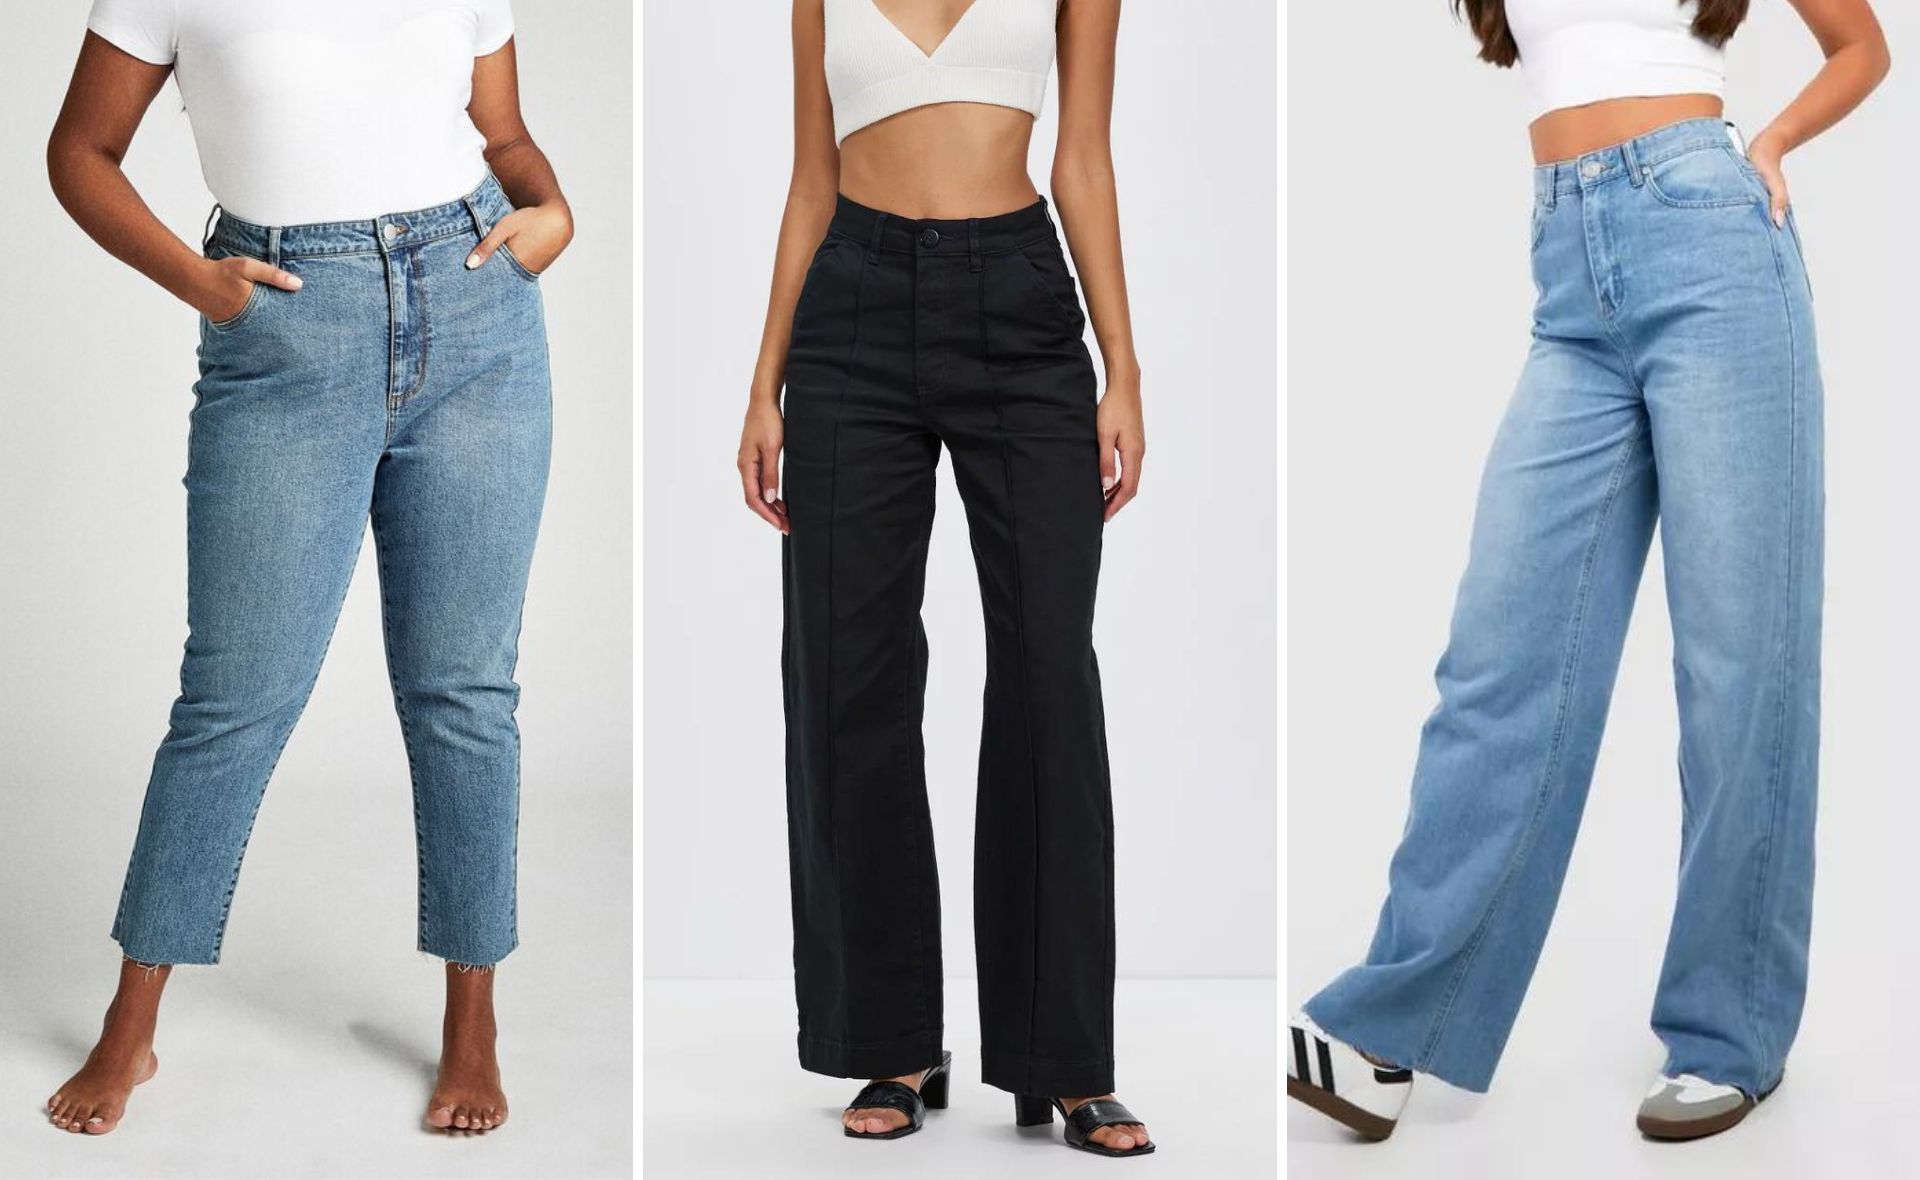 Denim dreaming: Where to find the best women’s jeans for every body shape